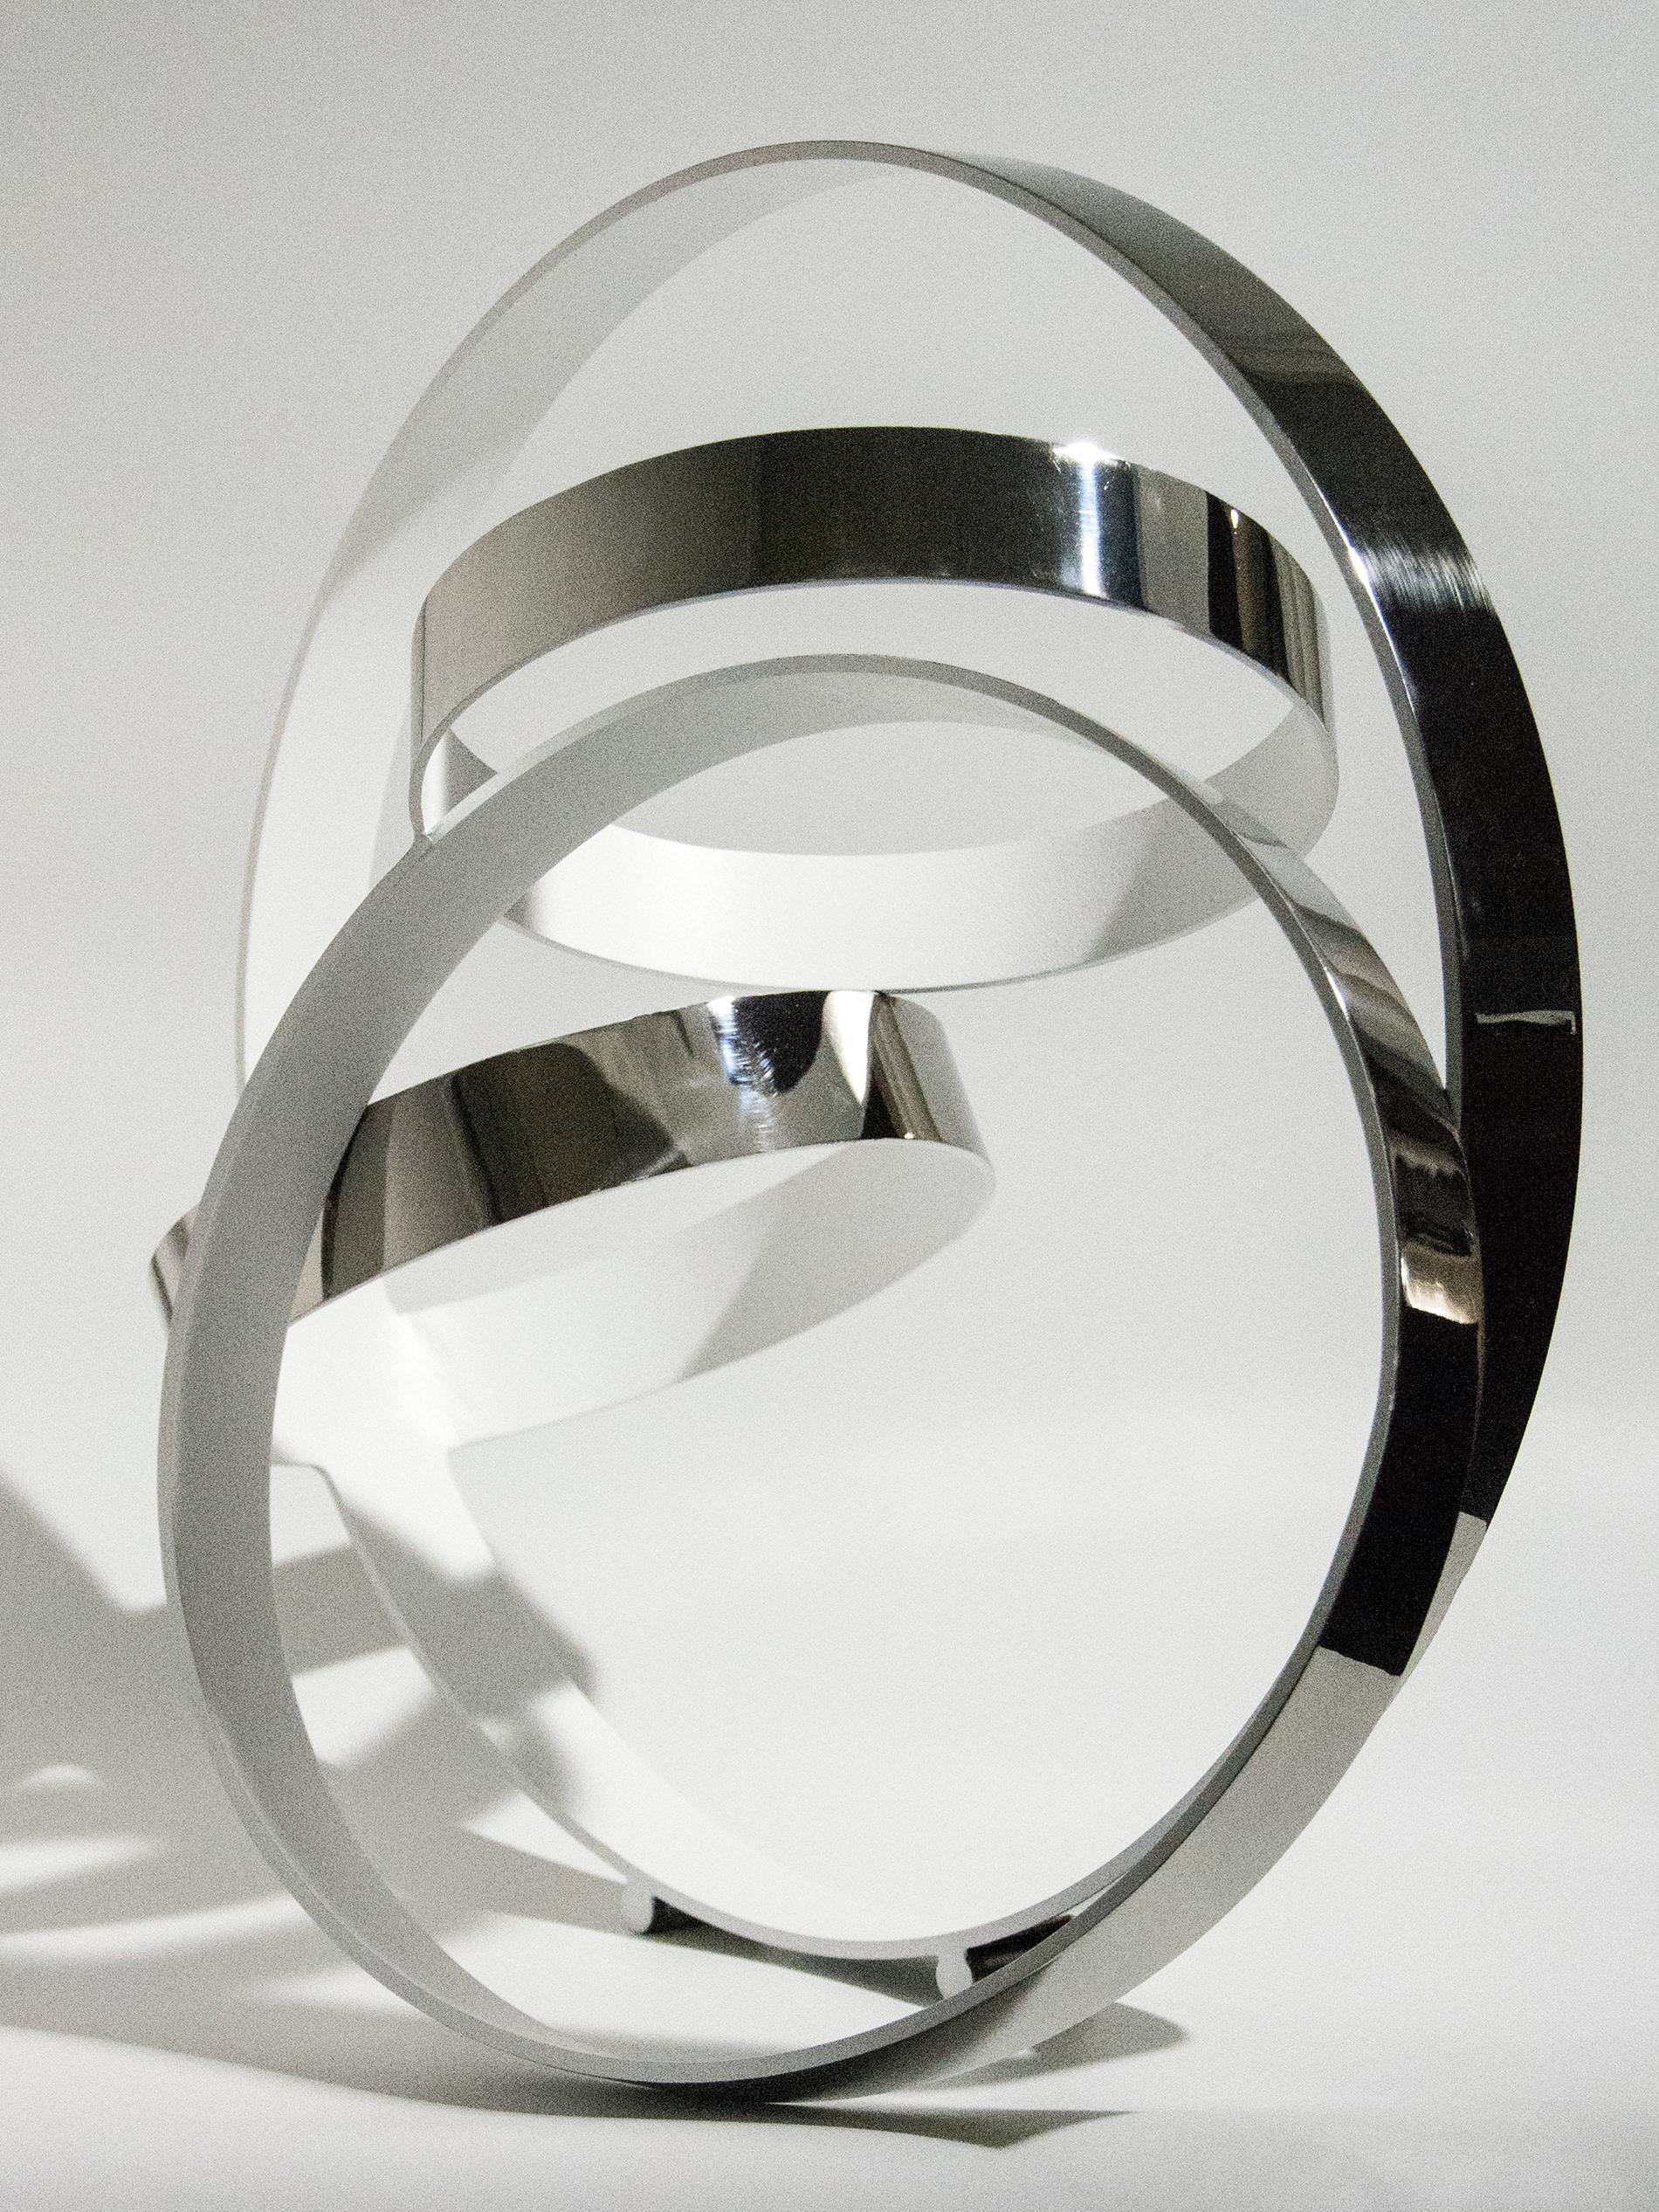 Four Ring Temps Zero White 2/10 - Stainless steel rings with white interior - Sculpture by Philippe Pallafray